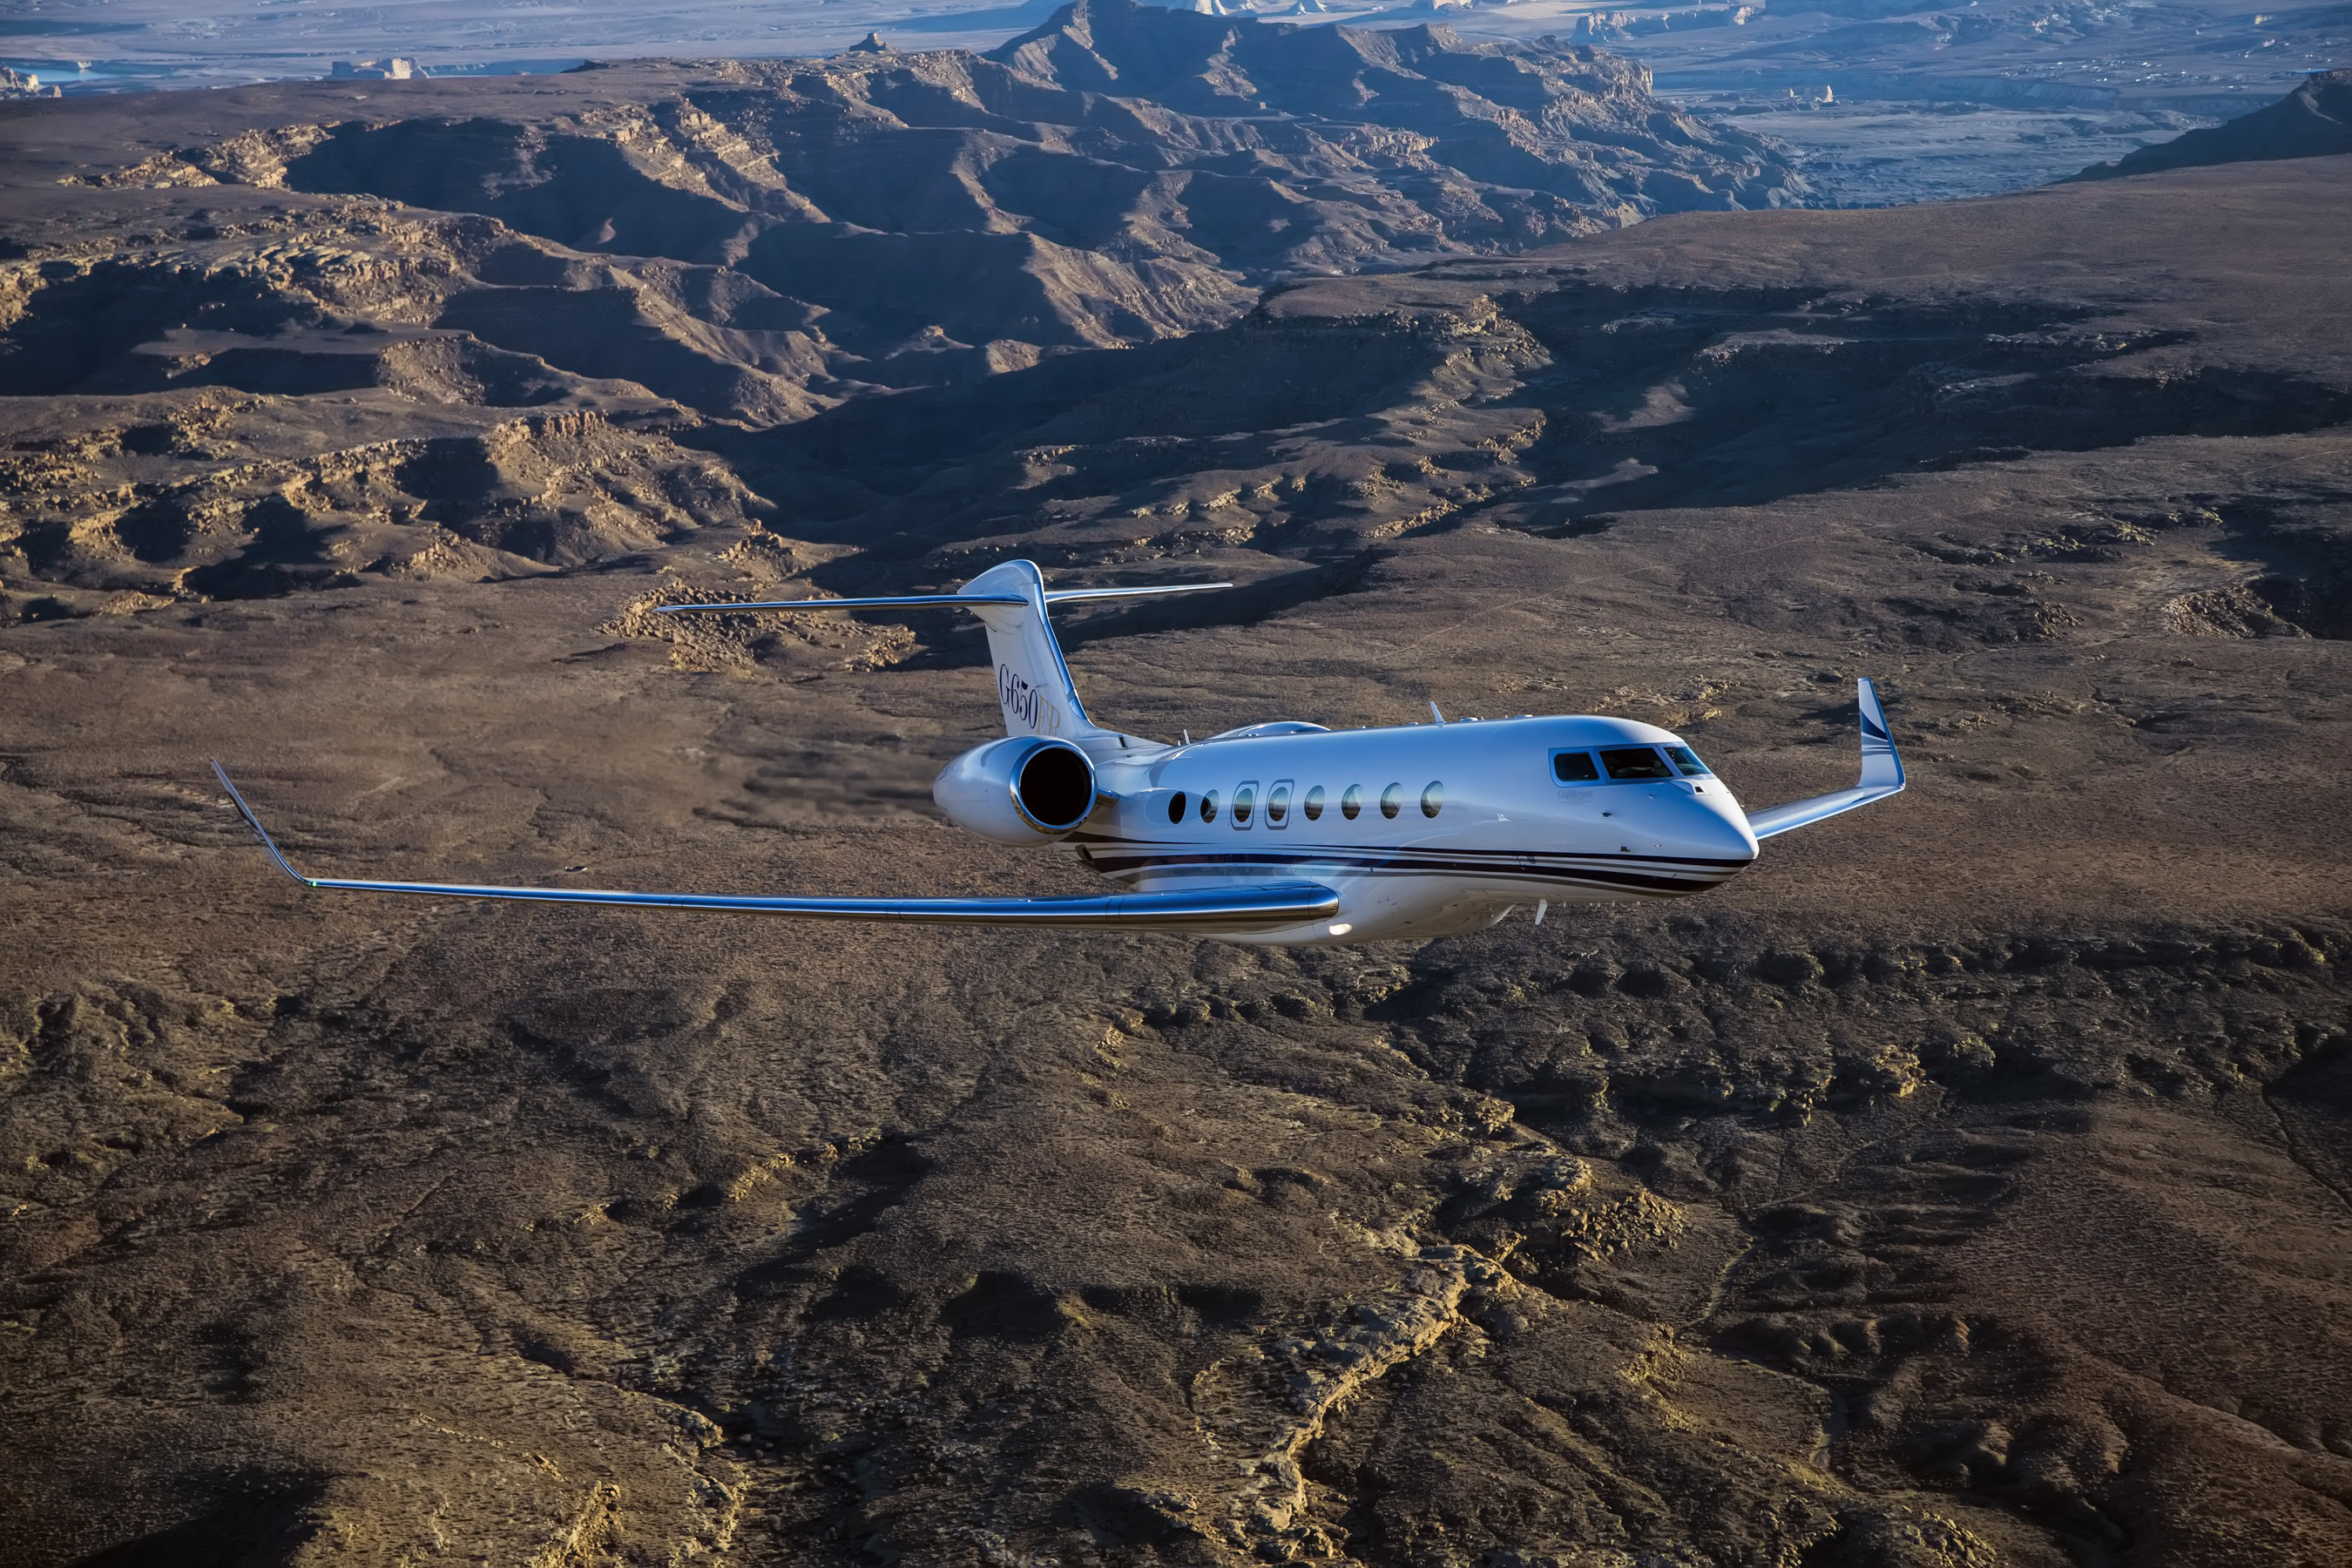 Gulfstream G650ER circumnavigates the globe in one stop. Gulfstream Aerospace Corp. today announced that the G650ER recently set two city-pair records while flying around the world in one stop. The aircraft landed both times with fuel in excess of National Business Aviation Association instrument flight rule reserves.